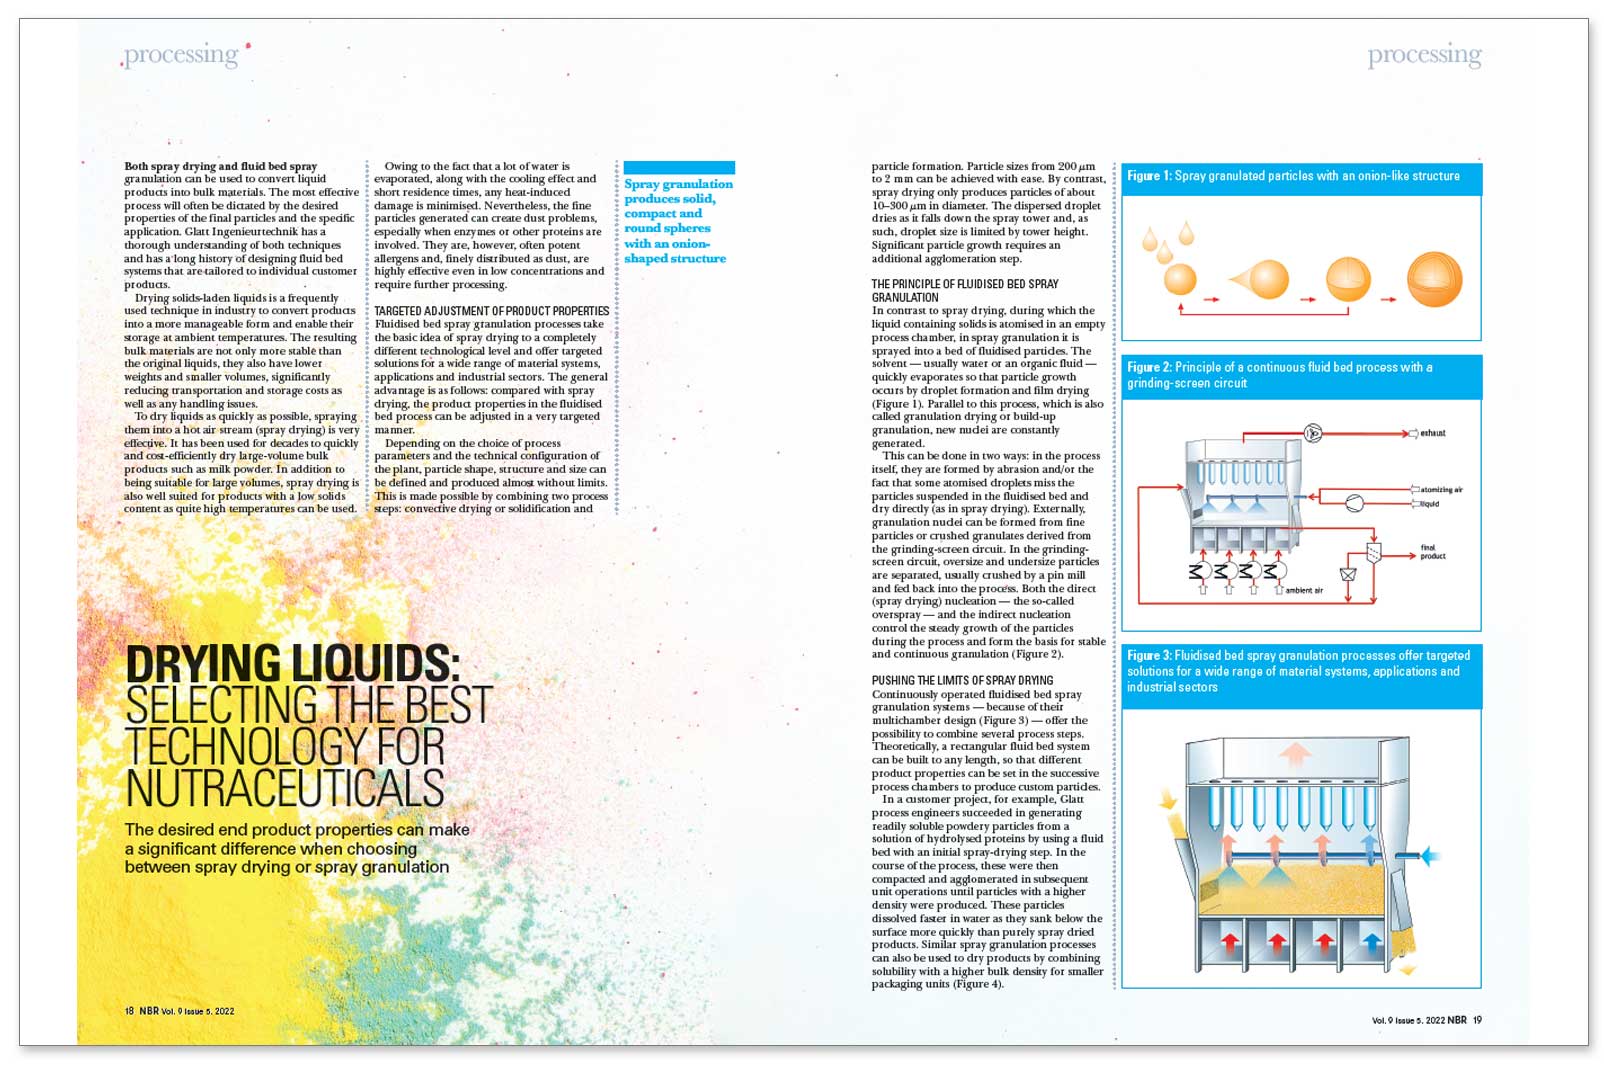 Drying liquids – Selecting the best technology for nutraceuticals